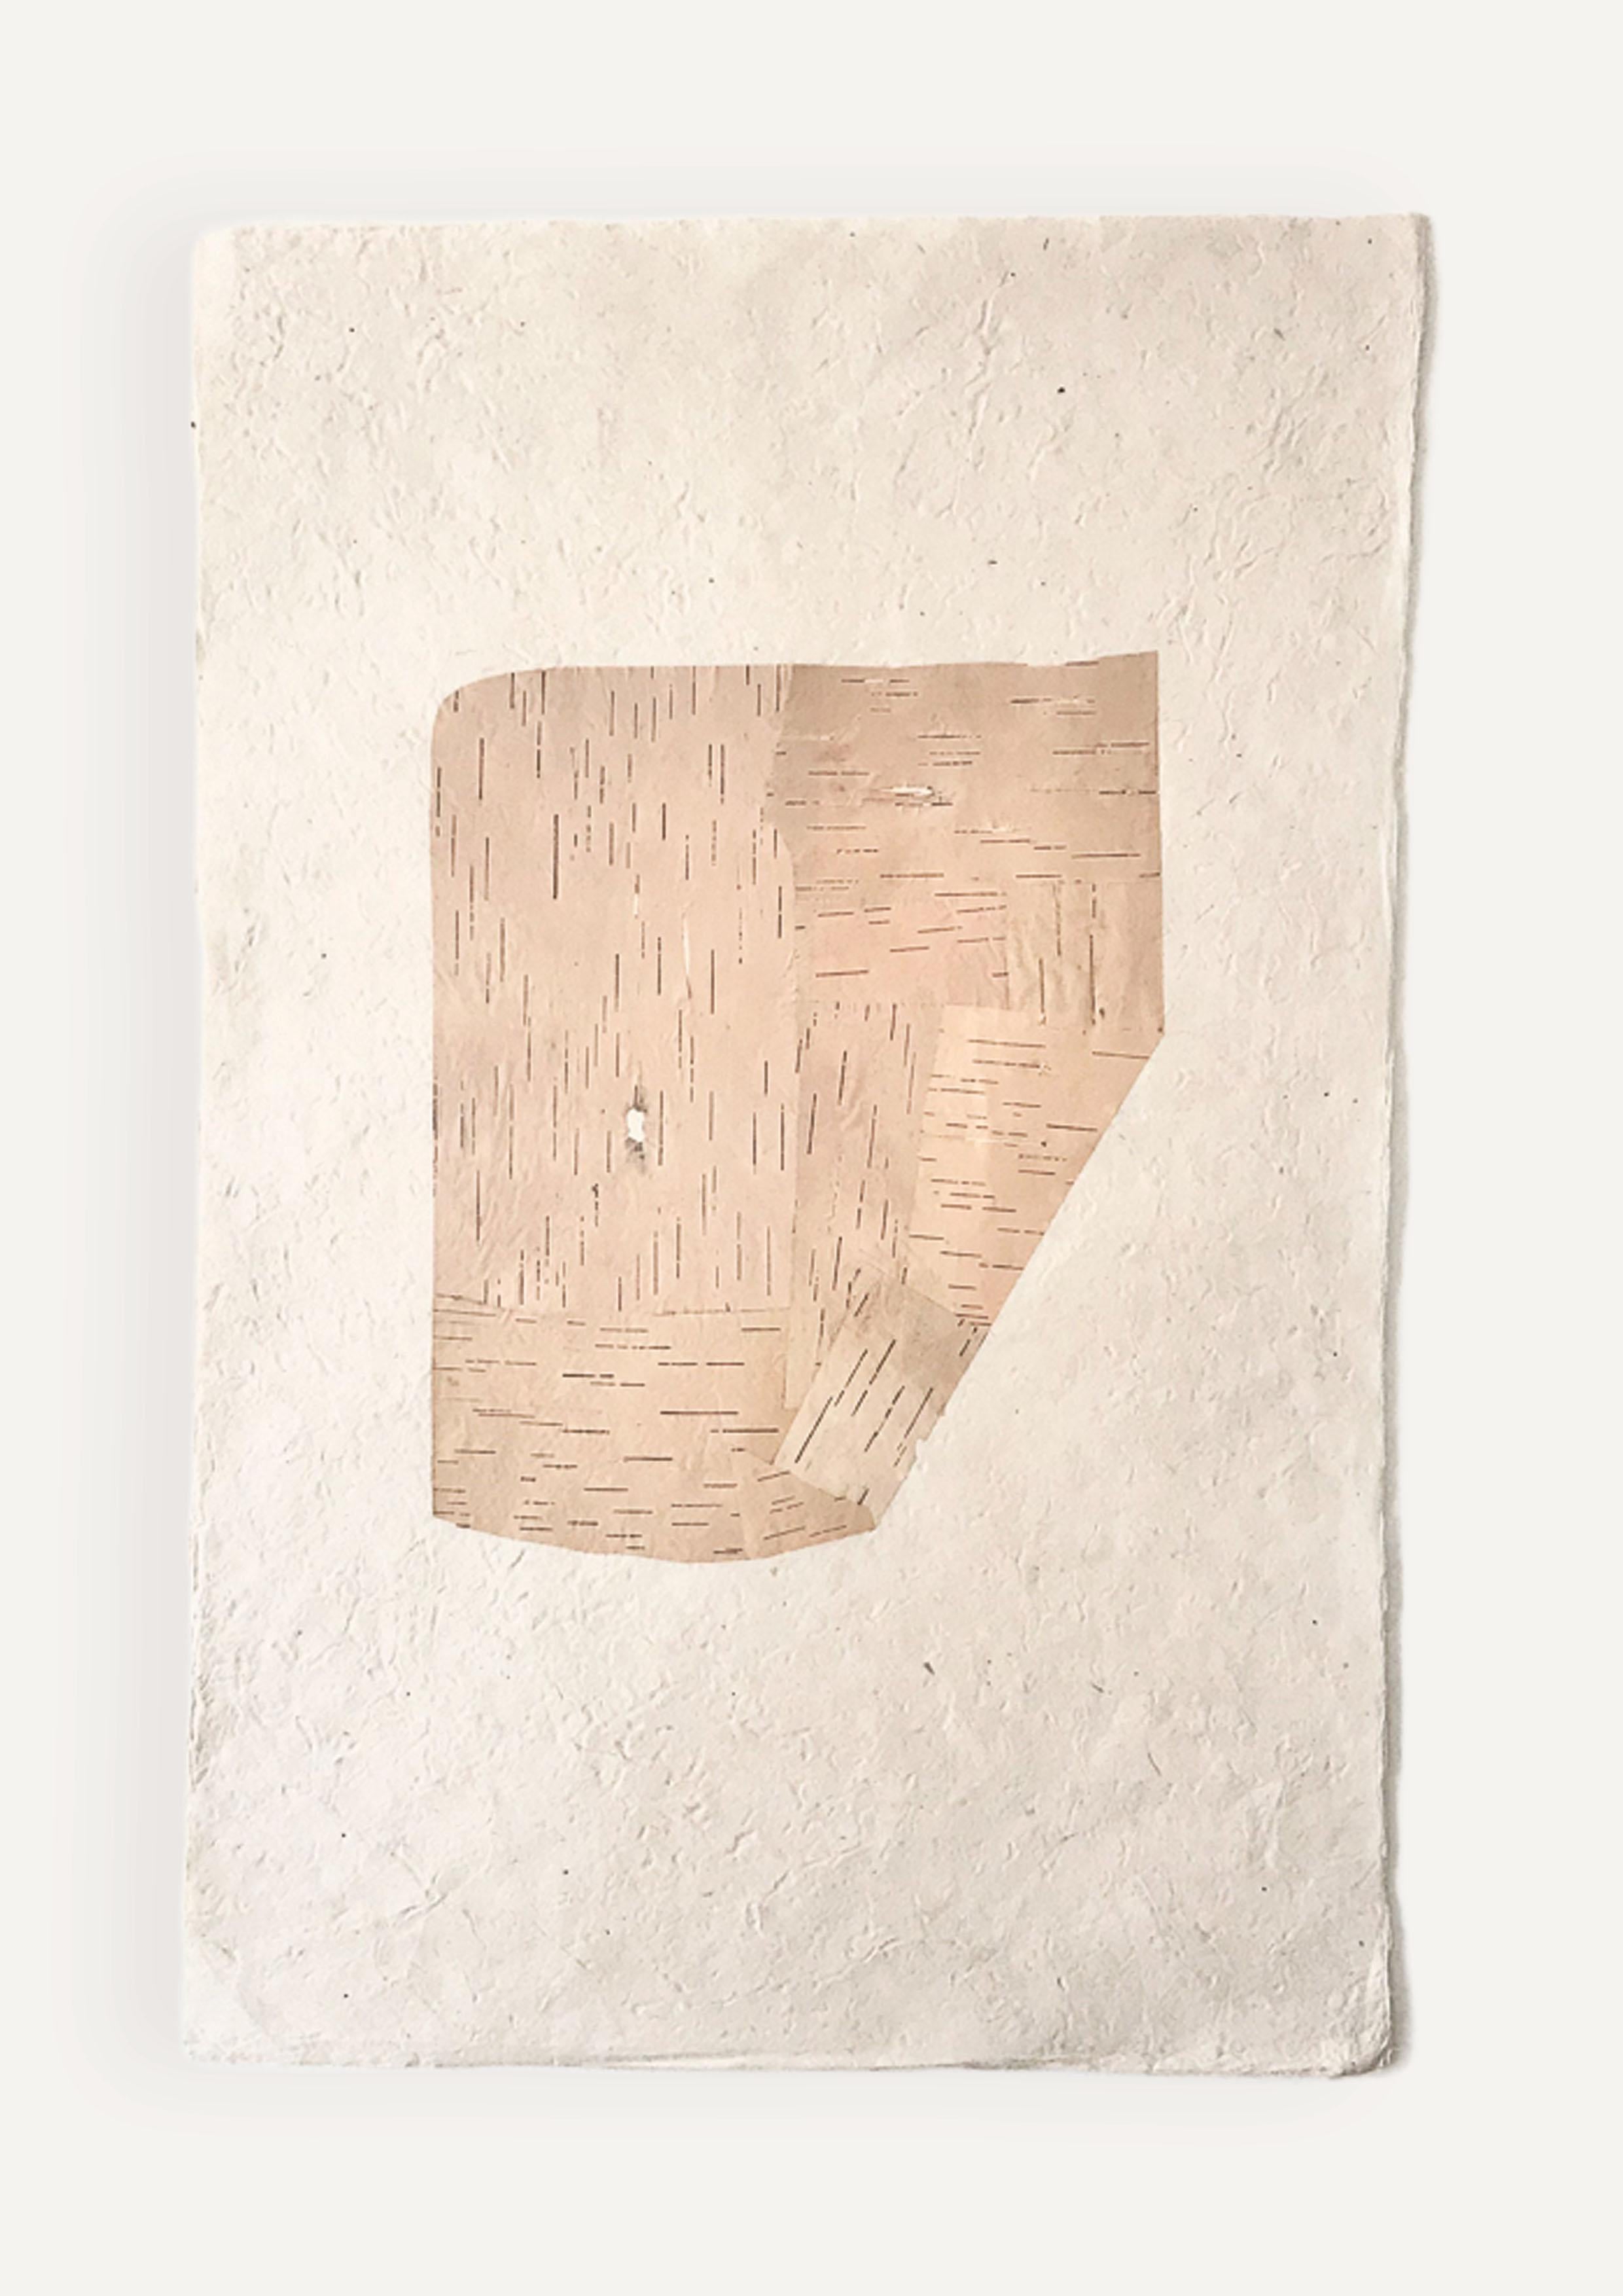 This artwork on handmade paper, by artist Sarita Arte, celebrates the organic qualities of Betula Papyrifera (paper birch). This species of birch, found only in North America, is unique for its bark which peels off in many layers revealing an